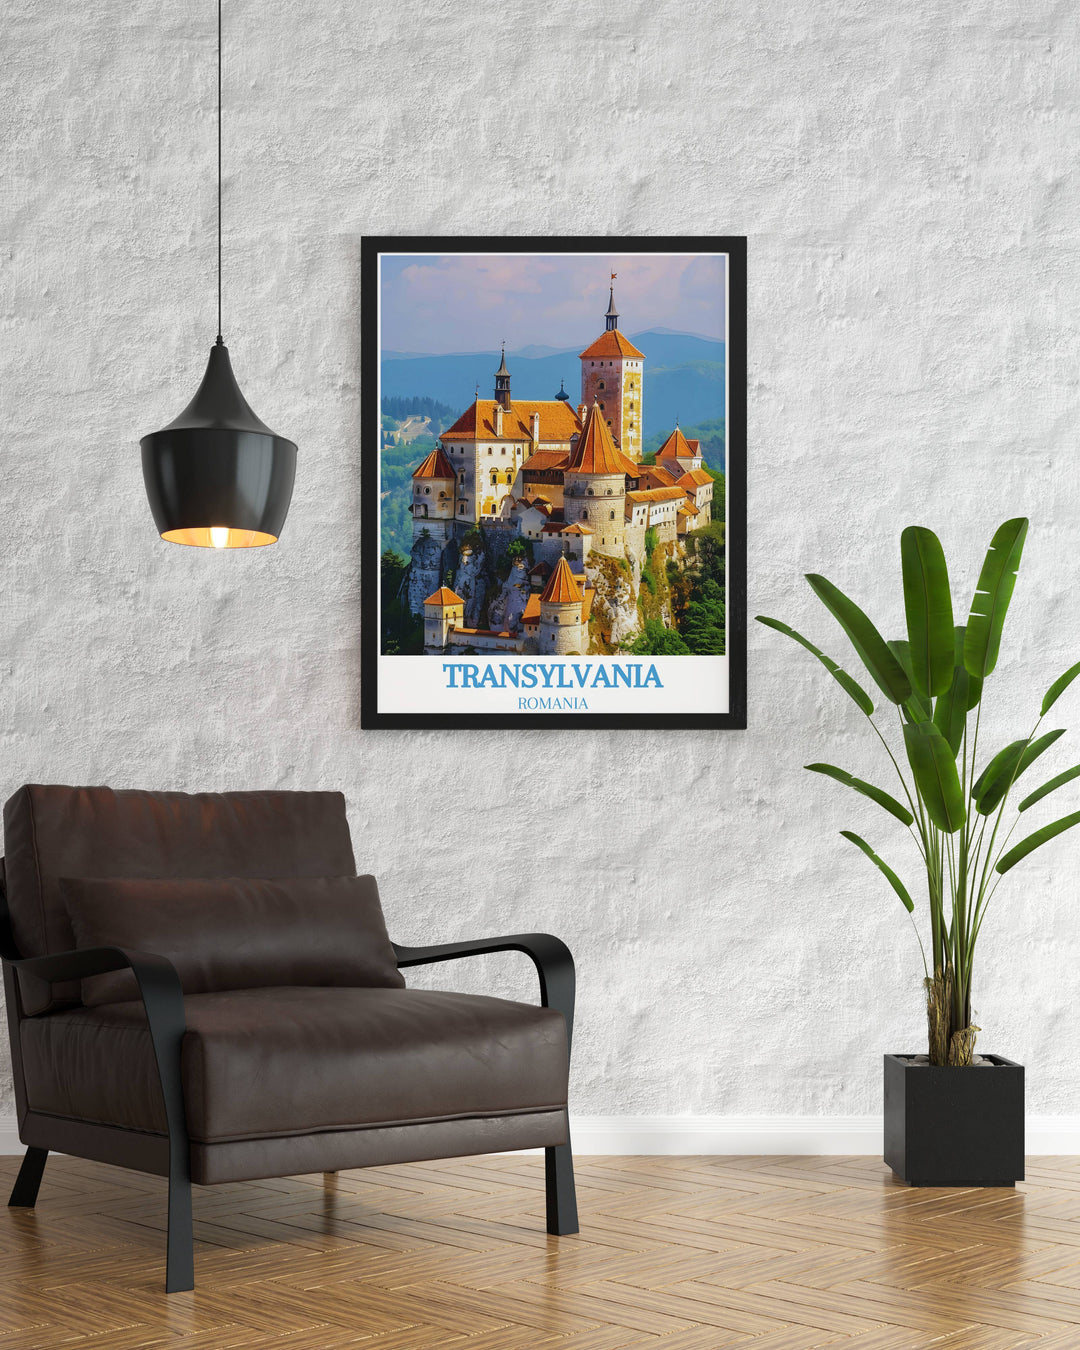 Fine art prints of Bran Castle capturing the essence of Romanias iconic landmark, with detailed imagery and vivid colors that bring the legendary fortress to life, perfect for art enthusiasts and history buffs alike.